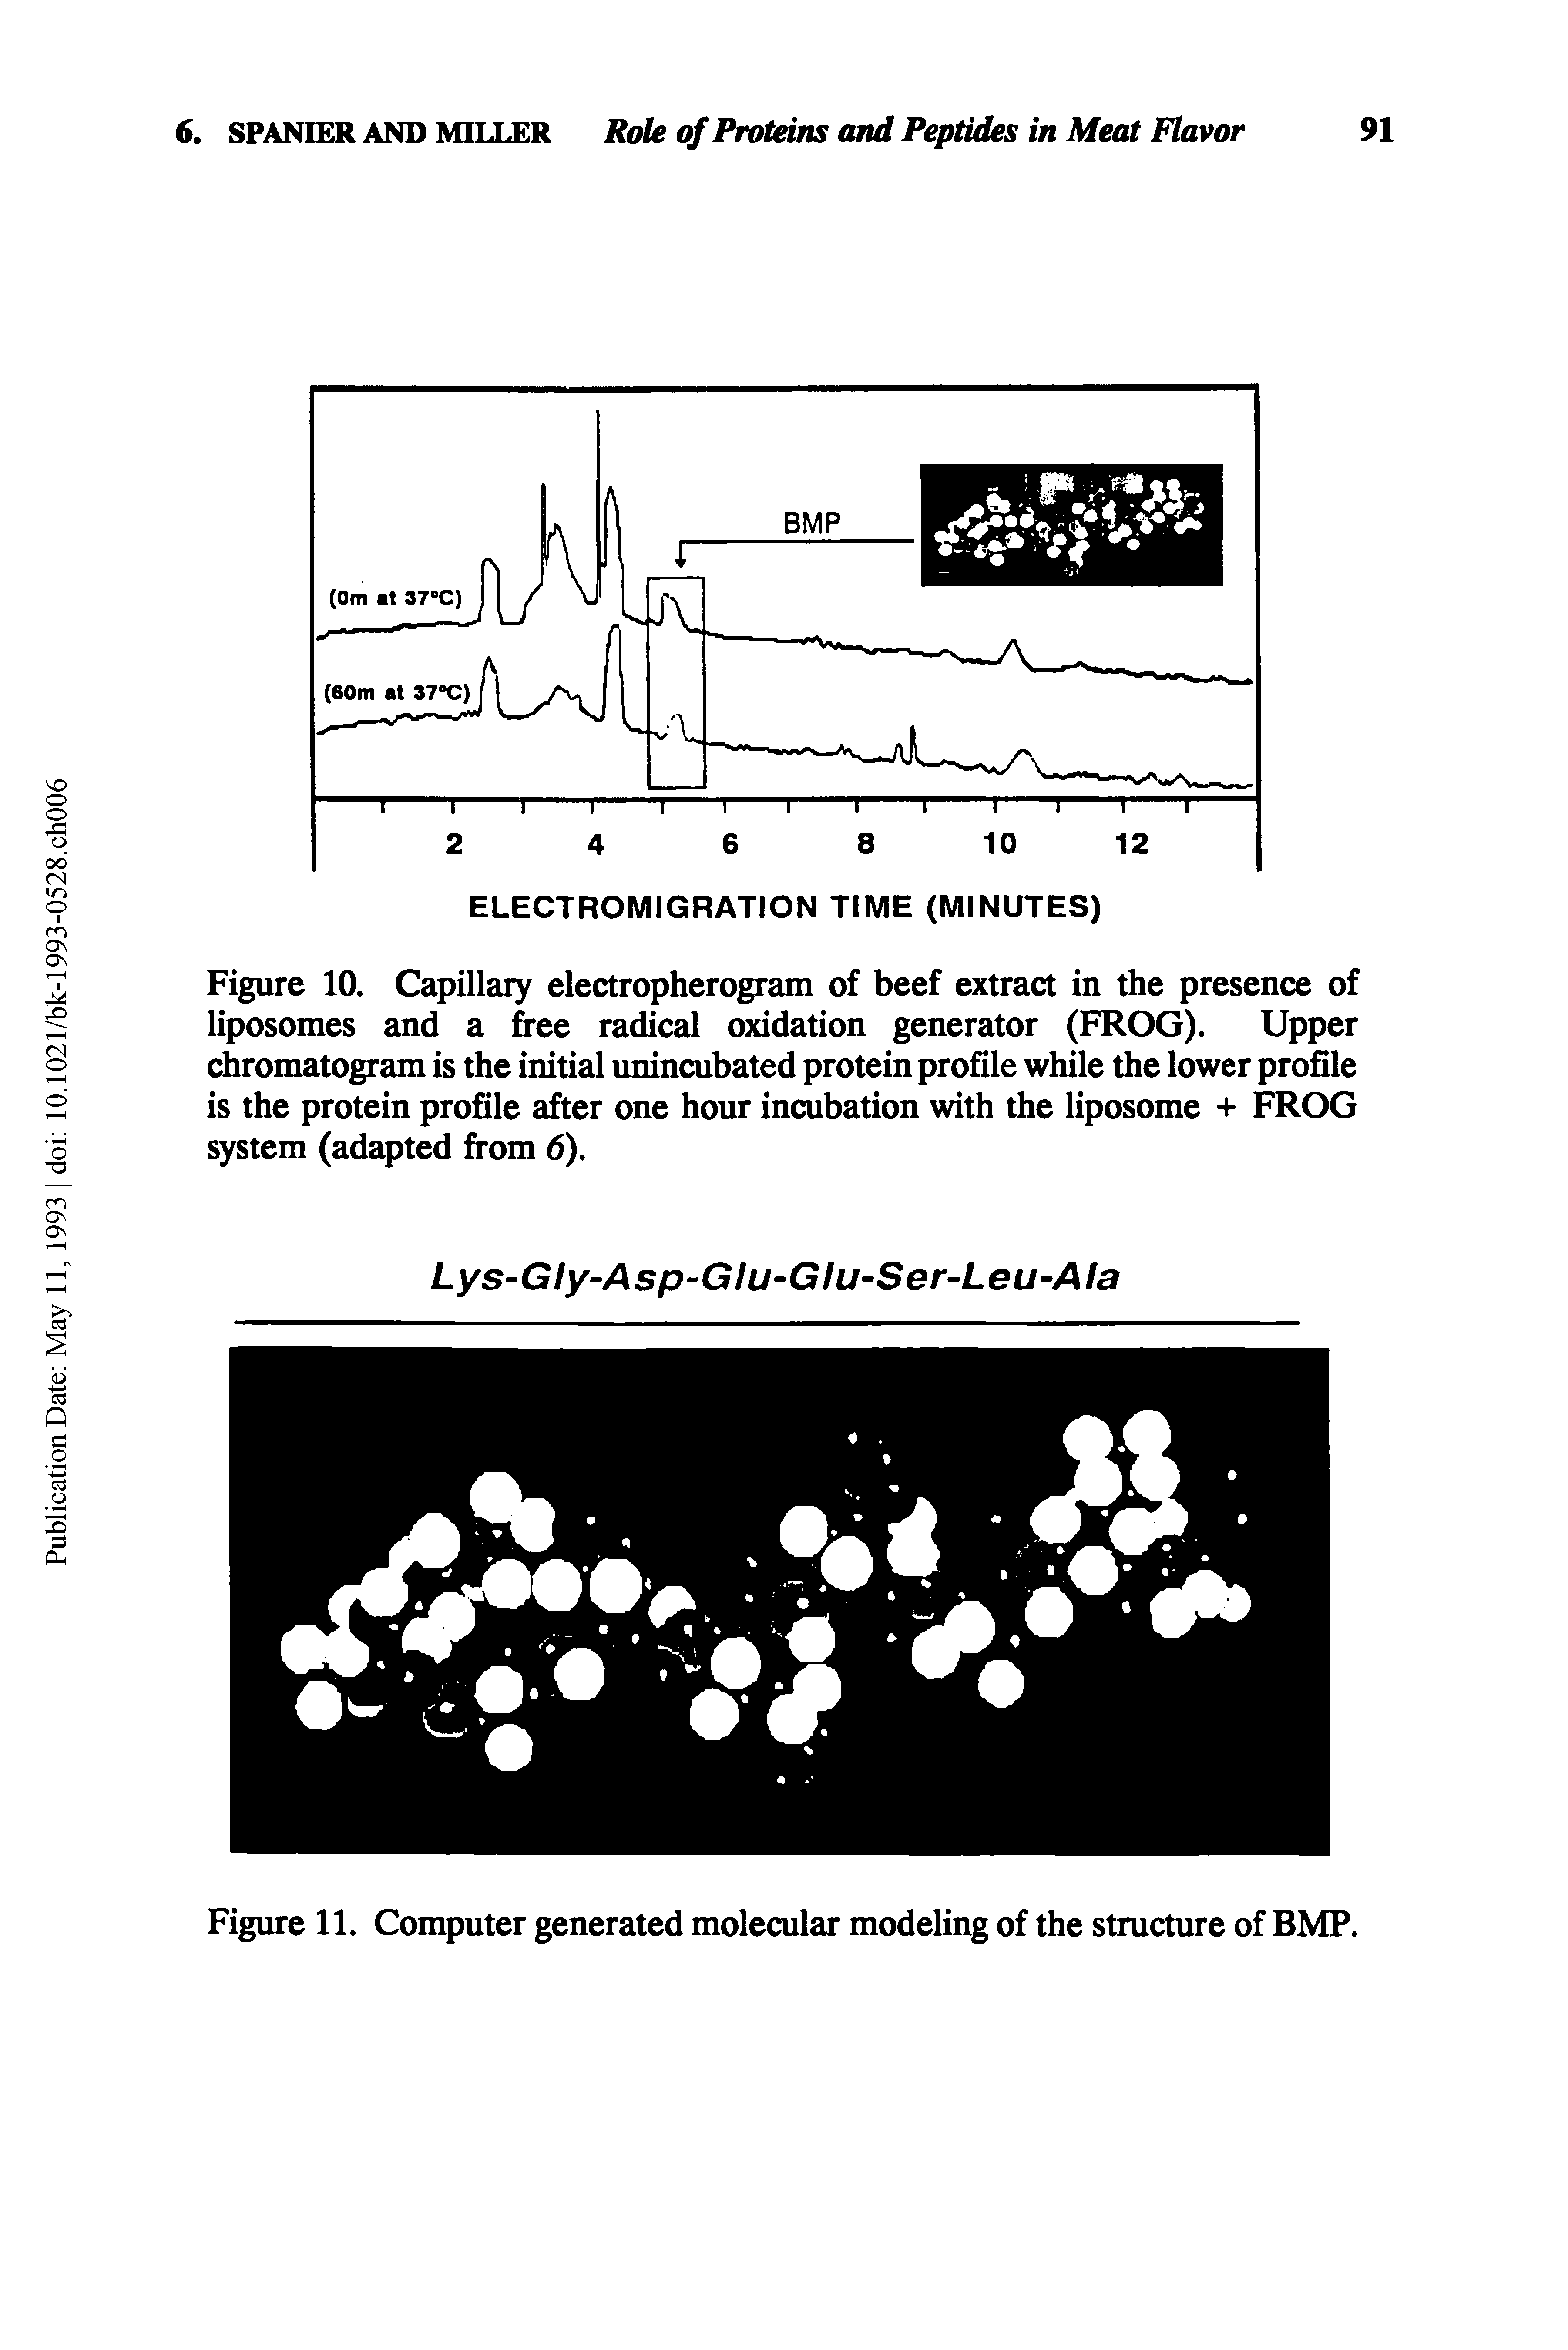 Figure 10. Capillary electropherogram of beef extract in the presence of liposomes and a free radical oxidation generator (FROG). Upper chromatogram is the initial unincubated protein profile while the lower profile is the protein profile after one hour incubation with the liposome + FROG system (adapted from 6).